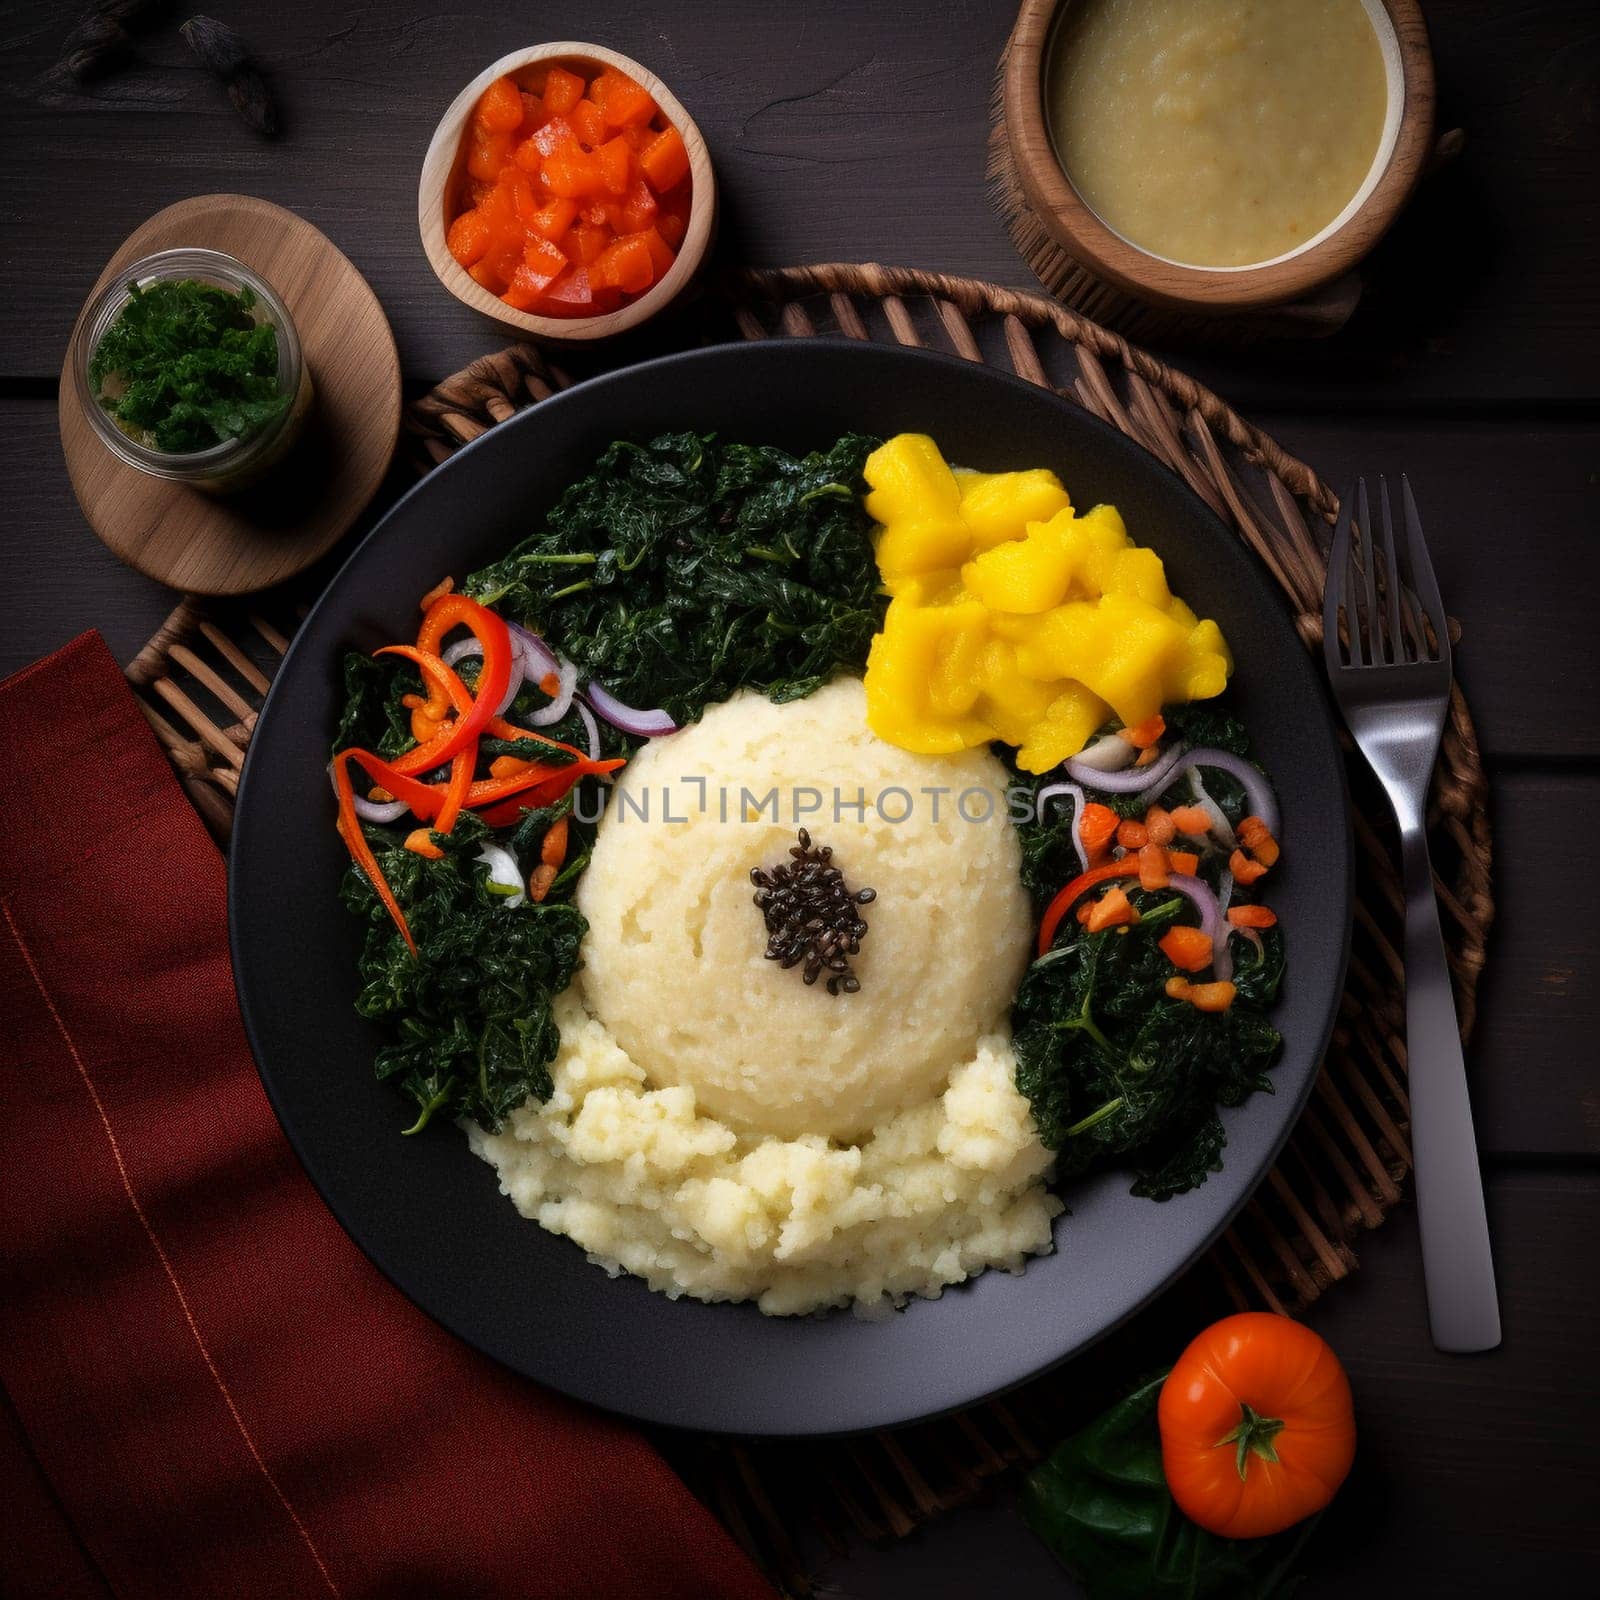 Savor the simple yet delicious flavors of Rwanda's Ugali with Isombe, a cornmeal porridge with cassava leaves. This image showcases the plate of Ugali with Isombe as the main focus, captured from a top-down perspective with a tight framing that highlights the variety of colorful ingredients and their vivid colors. The plate is placed on a traditional Rwandan plate or mat, evoking a sense of authenticity and cultural significance. Around the main dish, smaller bowls containing additional Rwandan dishes or condiments, such as beans or banana beer, add to the overall presentation. The lighting is natural and indirect, streaming in from one side, casting soft shadows that accentuate the textures and colors of the ingredients. The image evokes a sense of simplicity, comfort, and tradition, inviting the viewer to enjoy a humble and nourishing African meal. Emphasize the smooth and slightly grainy texture of the Ugali, as well as the flavors and aromas of the cassava leaves. Traditional Rwandan ingredients such as peanuts, chilies, and ginger add more visual interest and showcase the unique flavors of the dish.